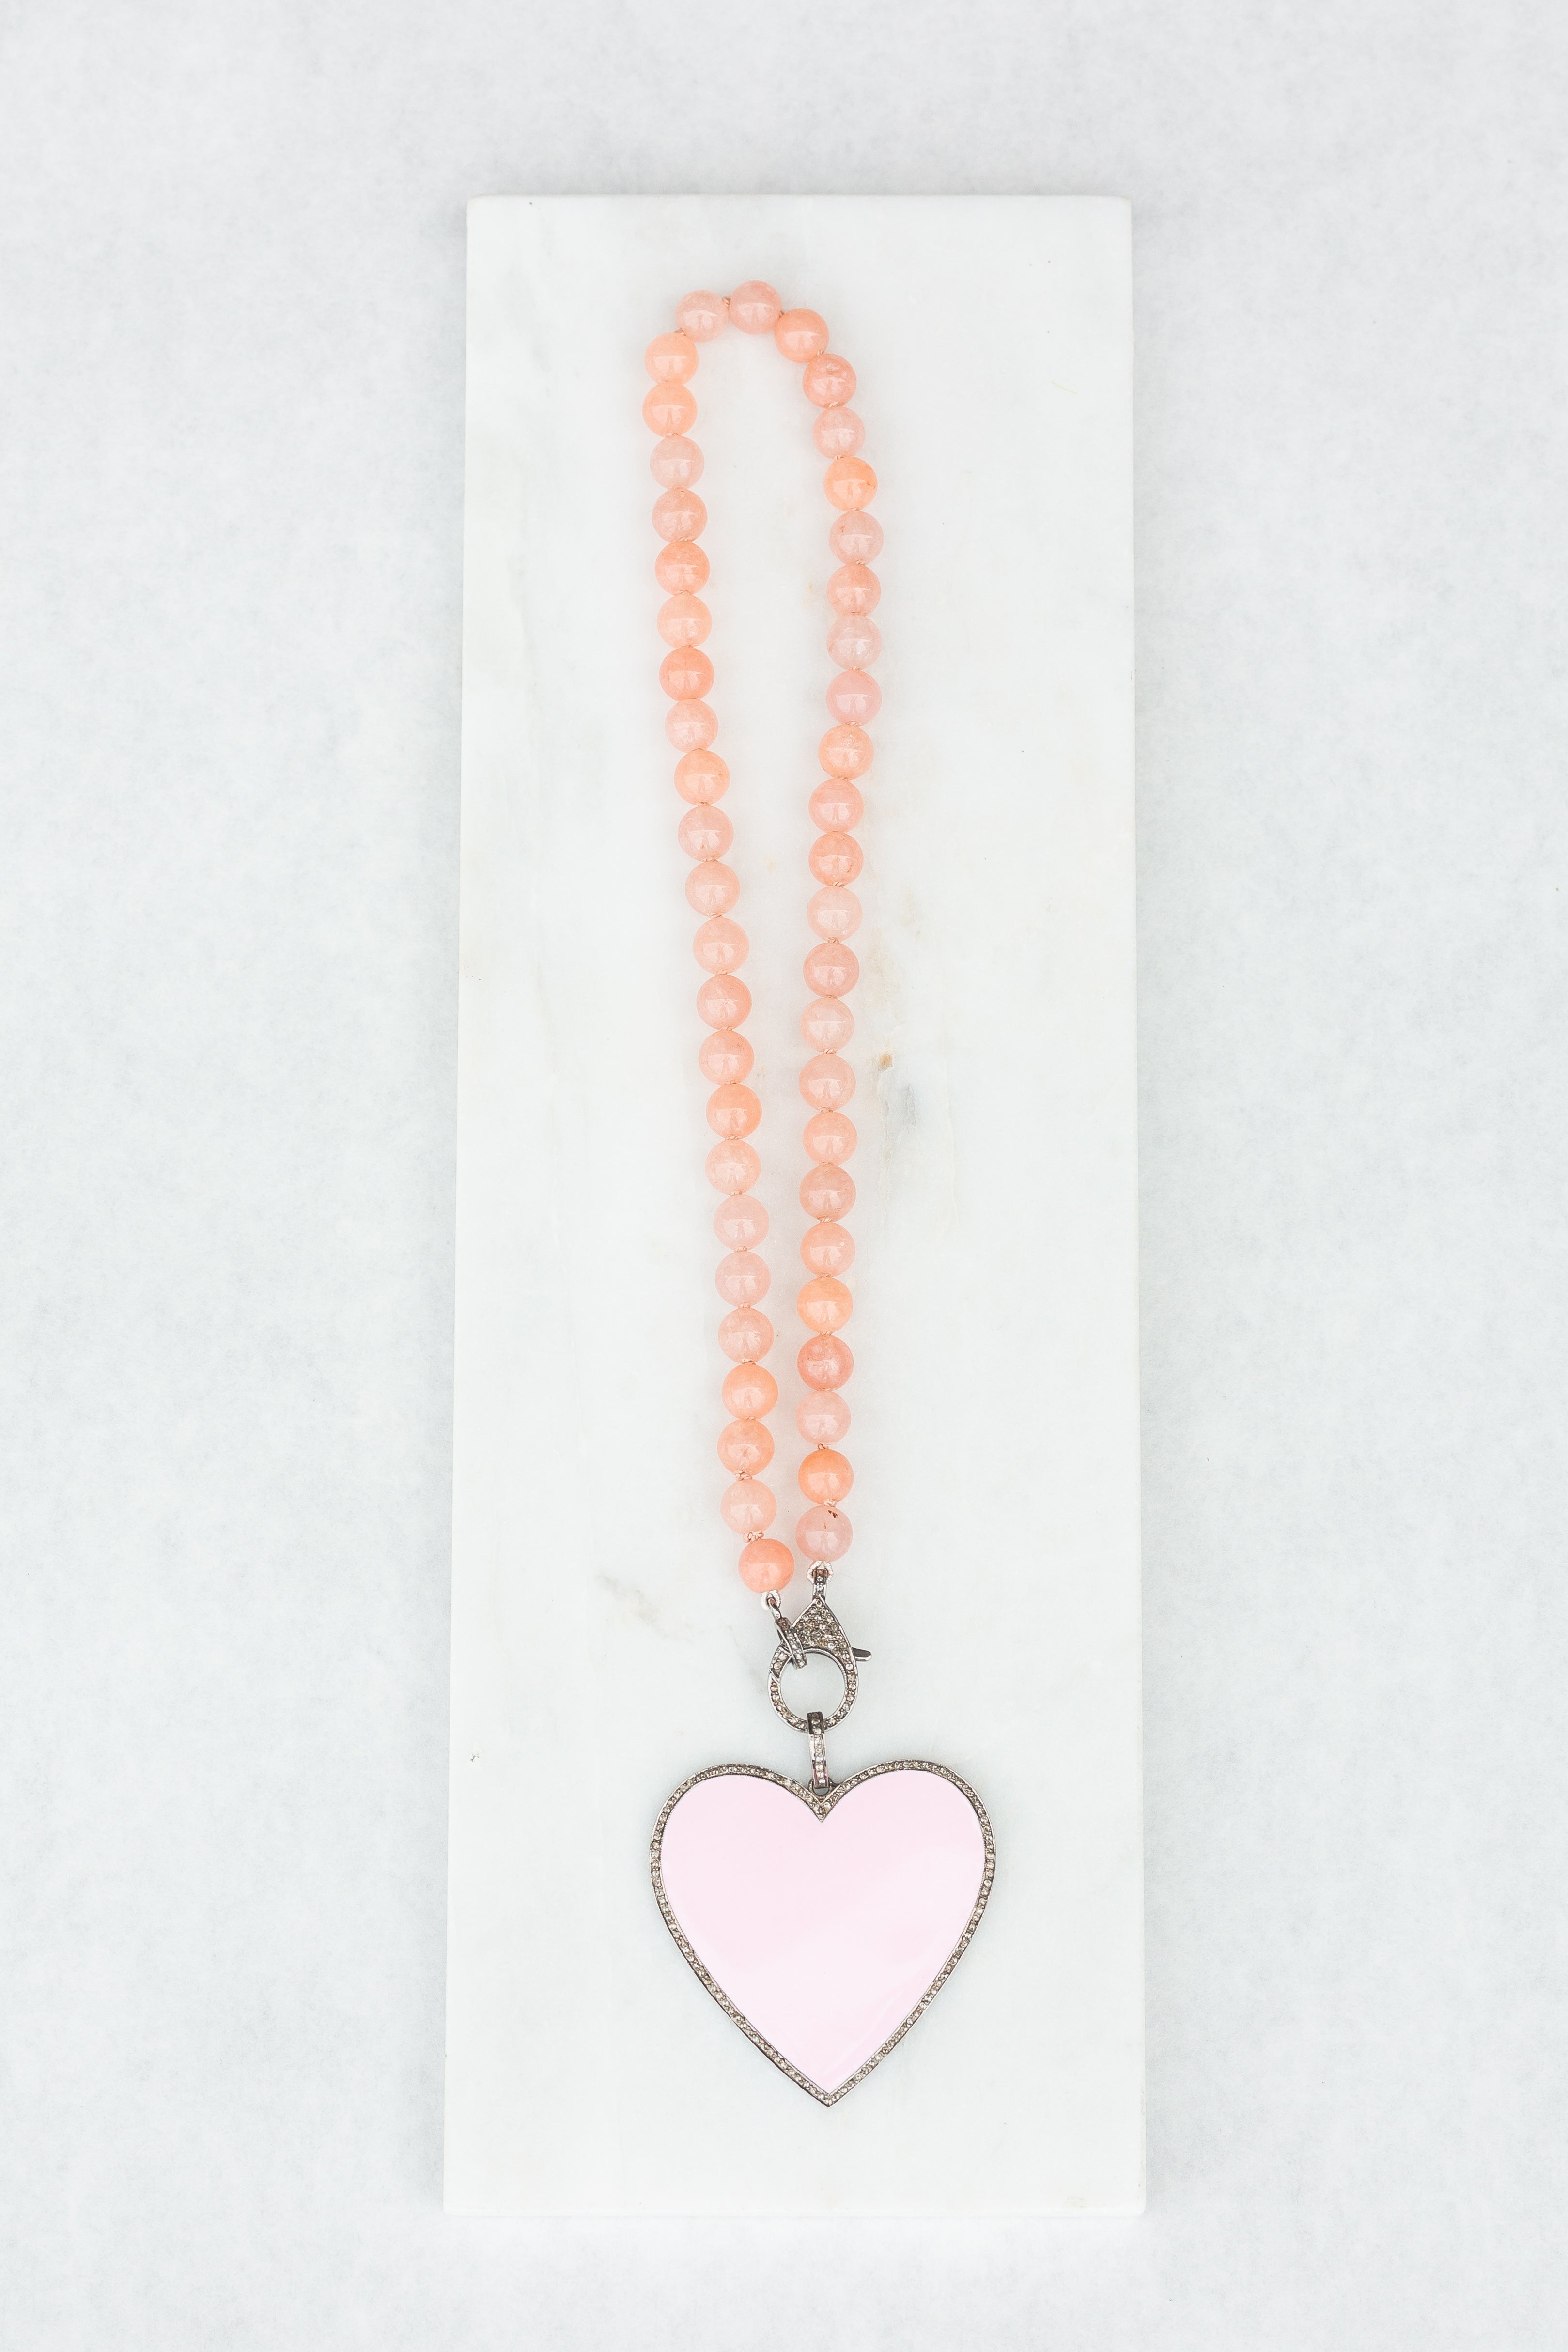 c100- Big Heart  Silver/Baby Pink